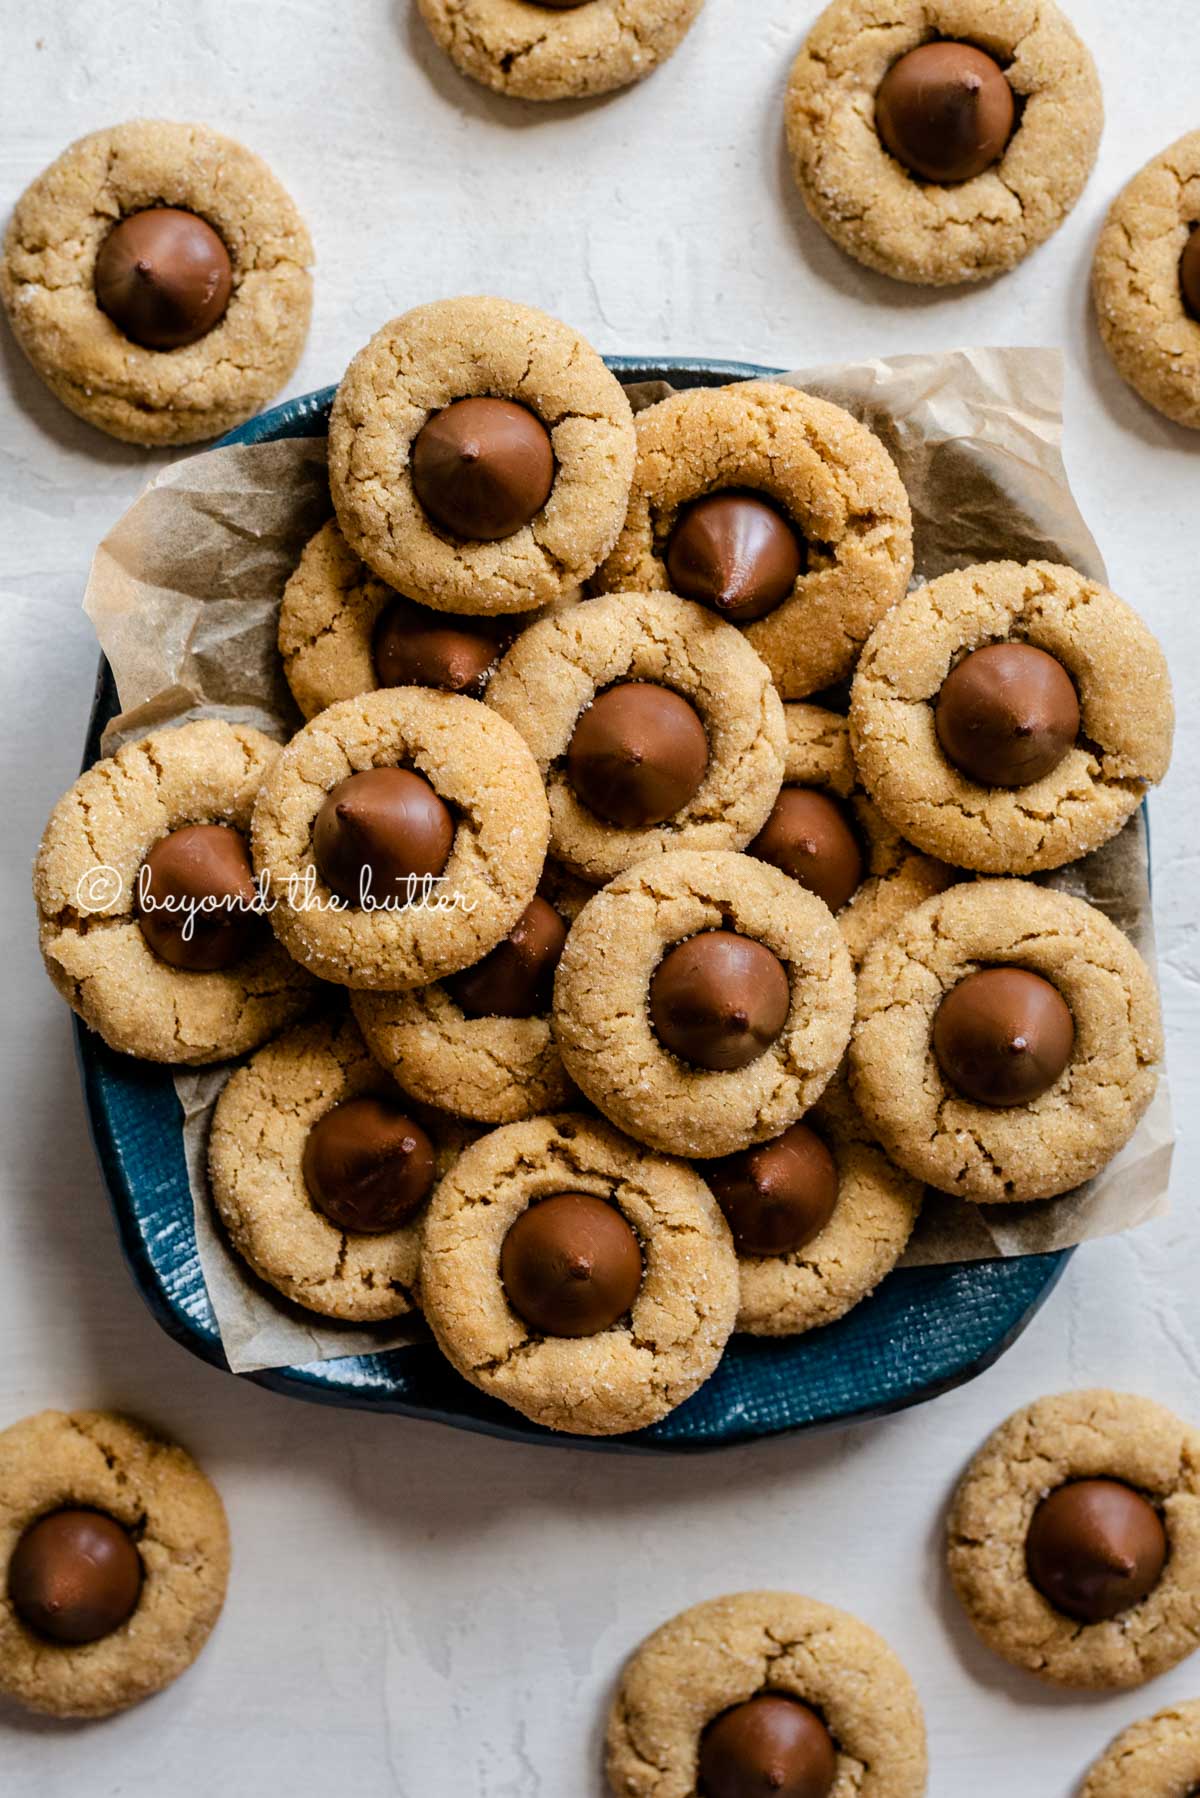 Overhead image of classic peanut butter blossoms on a parchment lined blue dessert platter | All Images © Beyond the Butter™